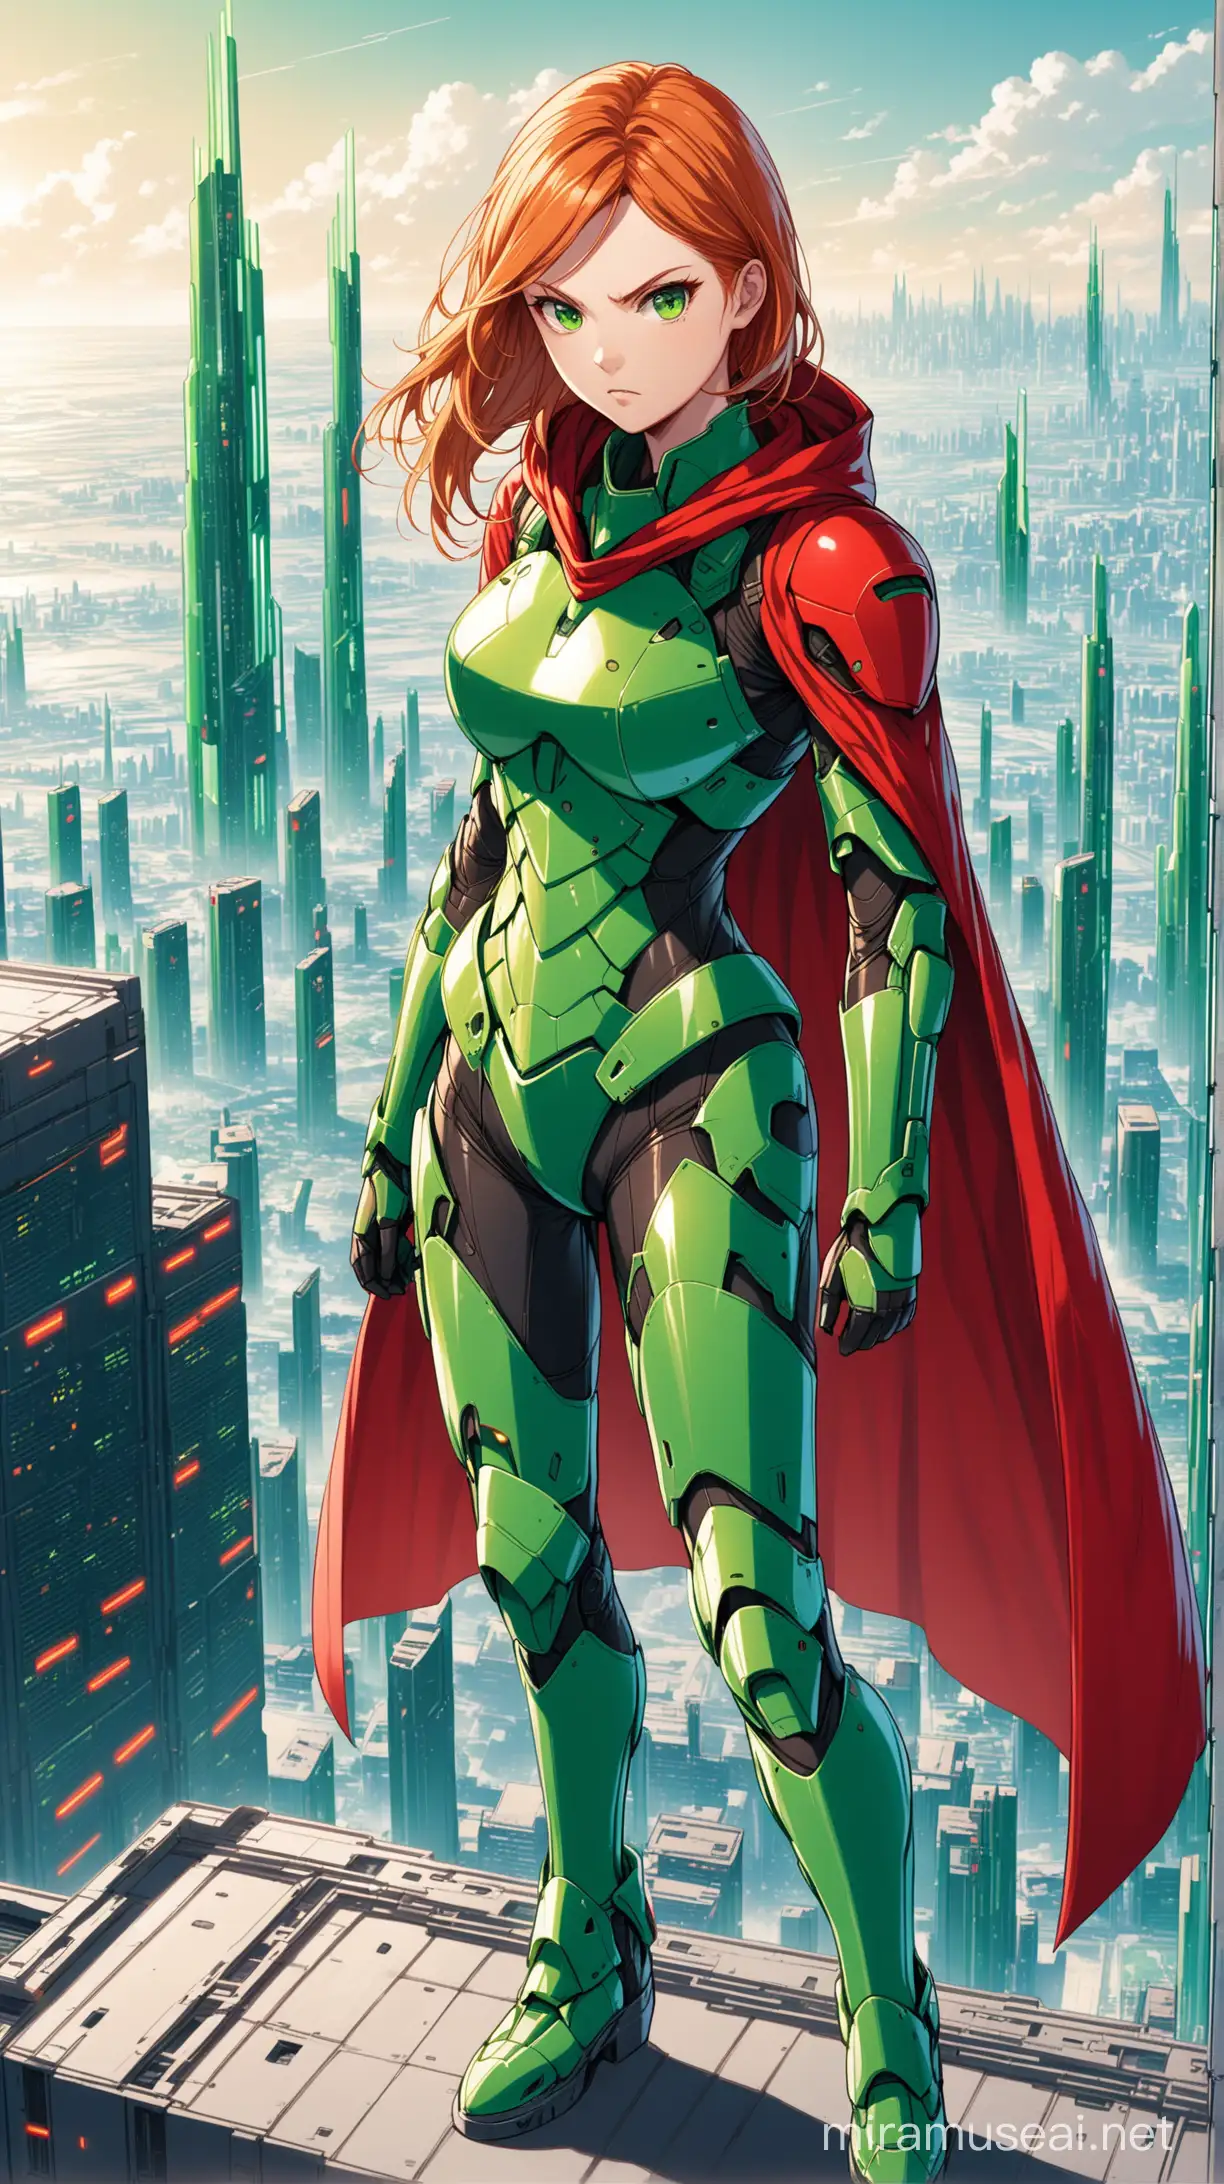 A young woman, green eyes, strawberry blonde hair, wearing green futuristic armour, determined expression, red domino mask, red cape, standing on a building in a futuristic city